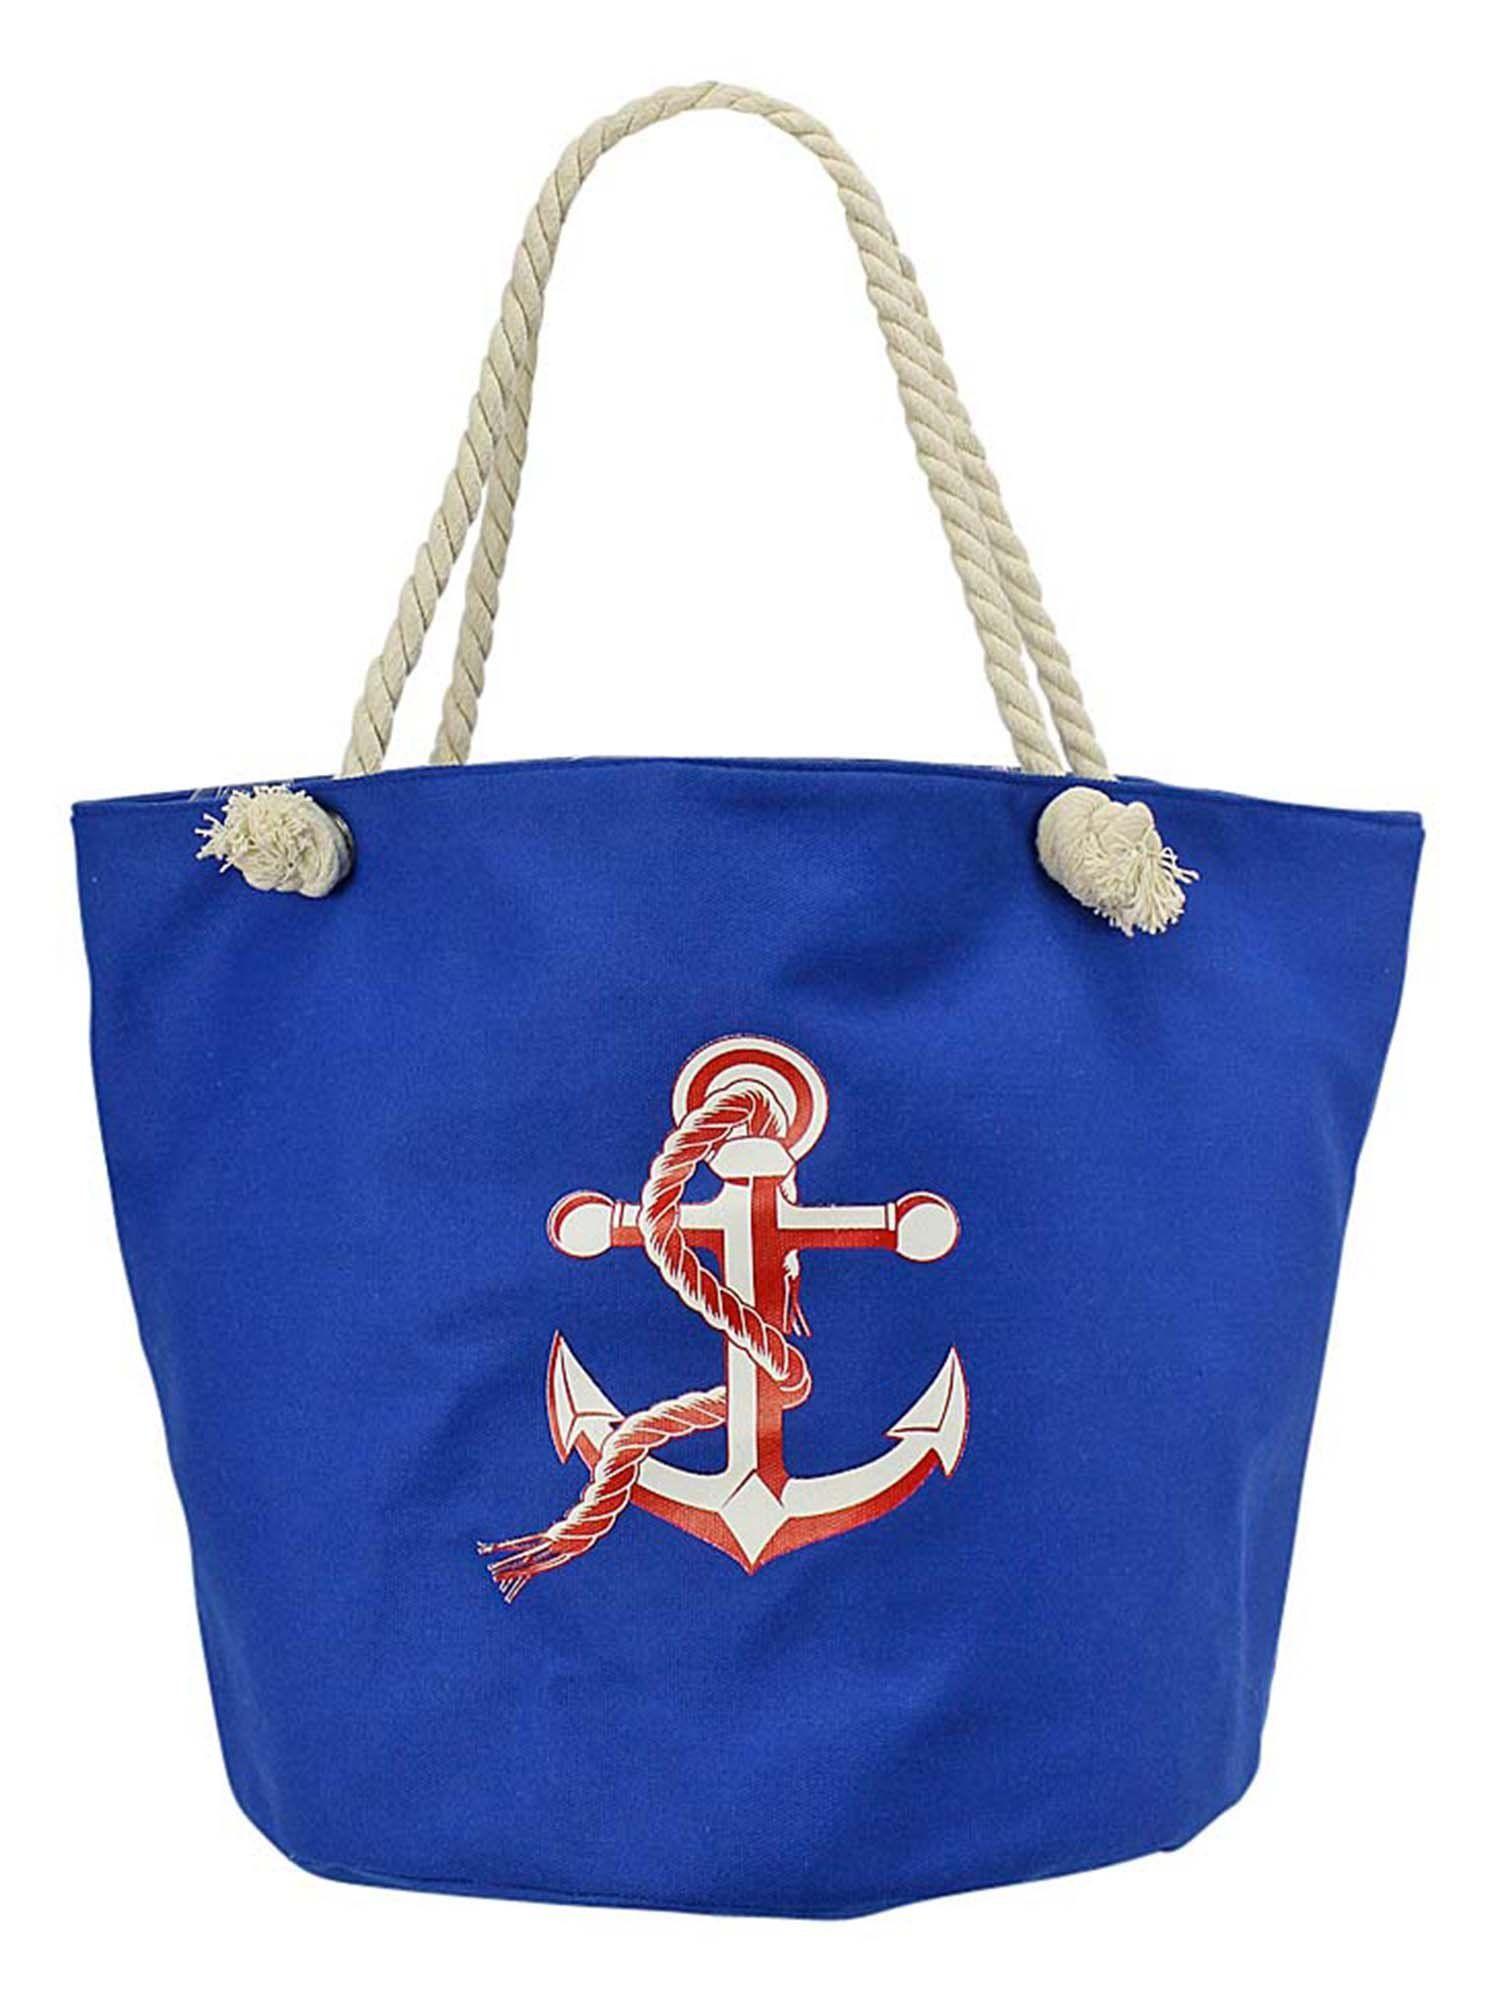 Anchor Blue and Red Logo - Blue Canvas Beach Bag Tote With Red & White Anchor